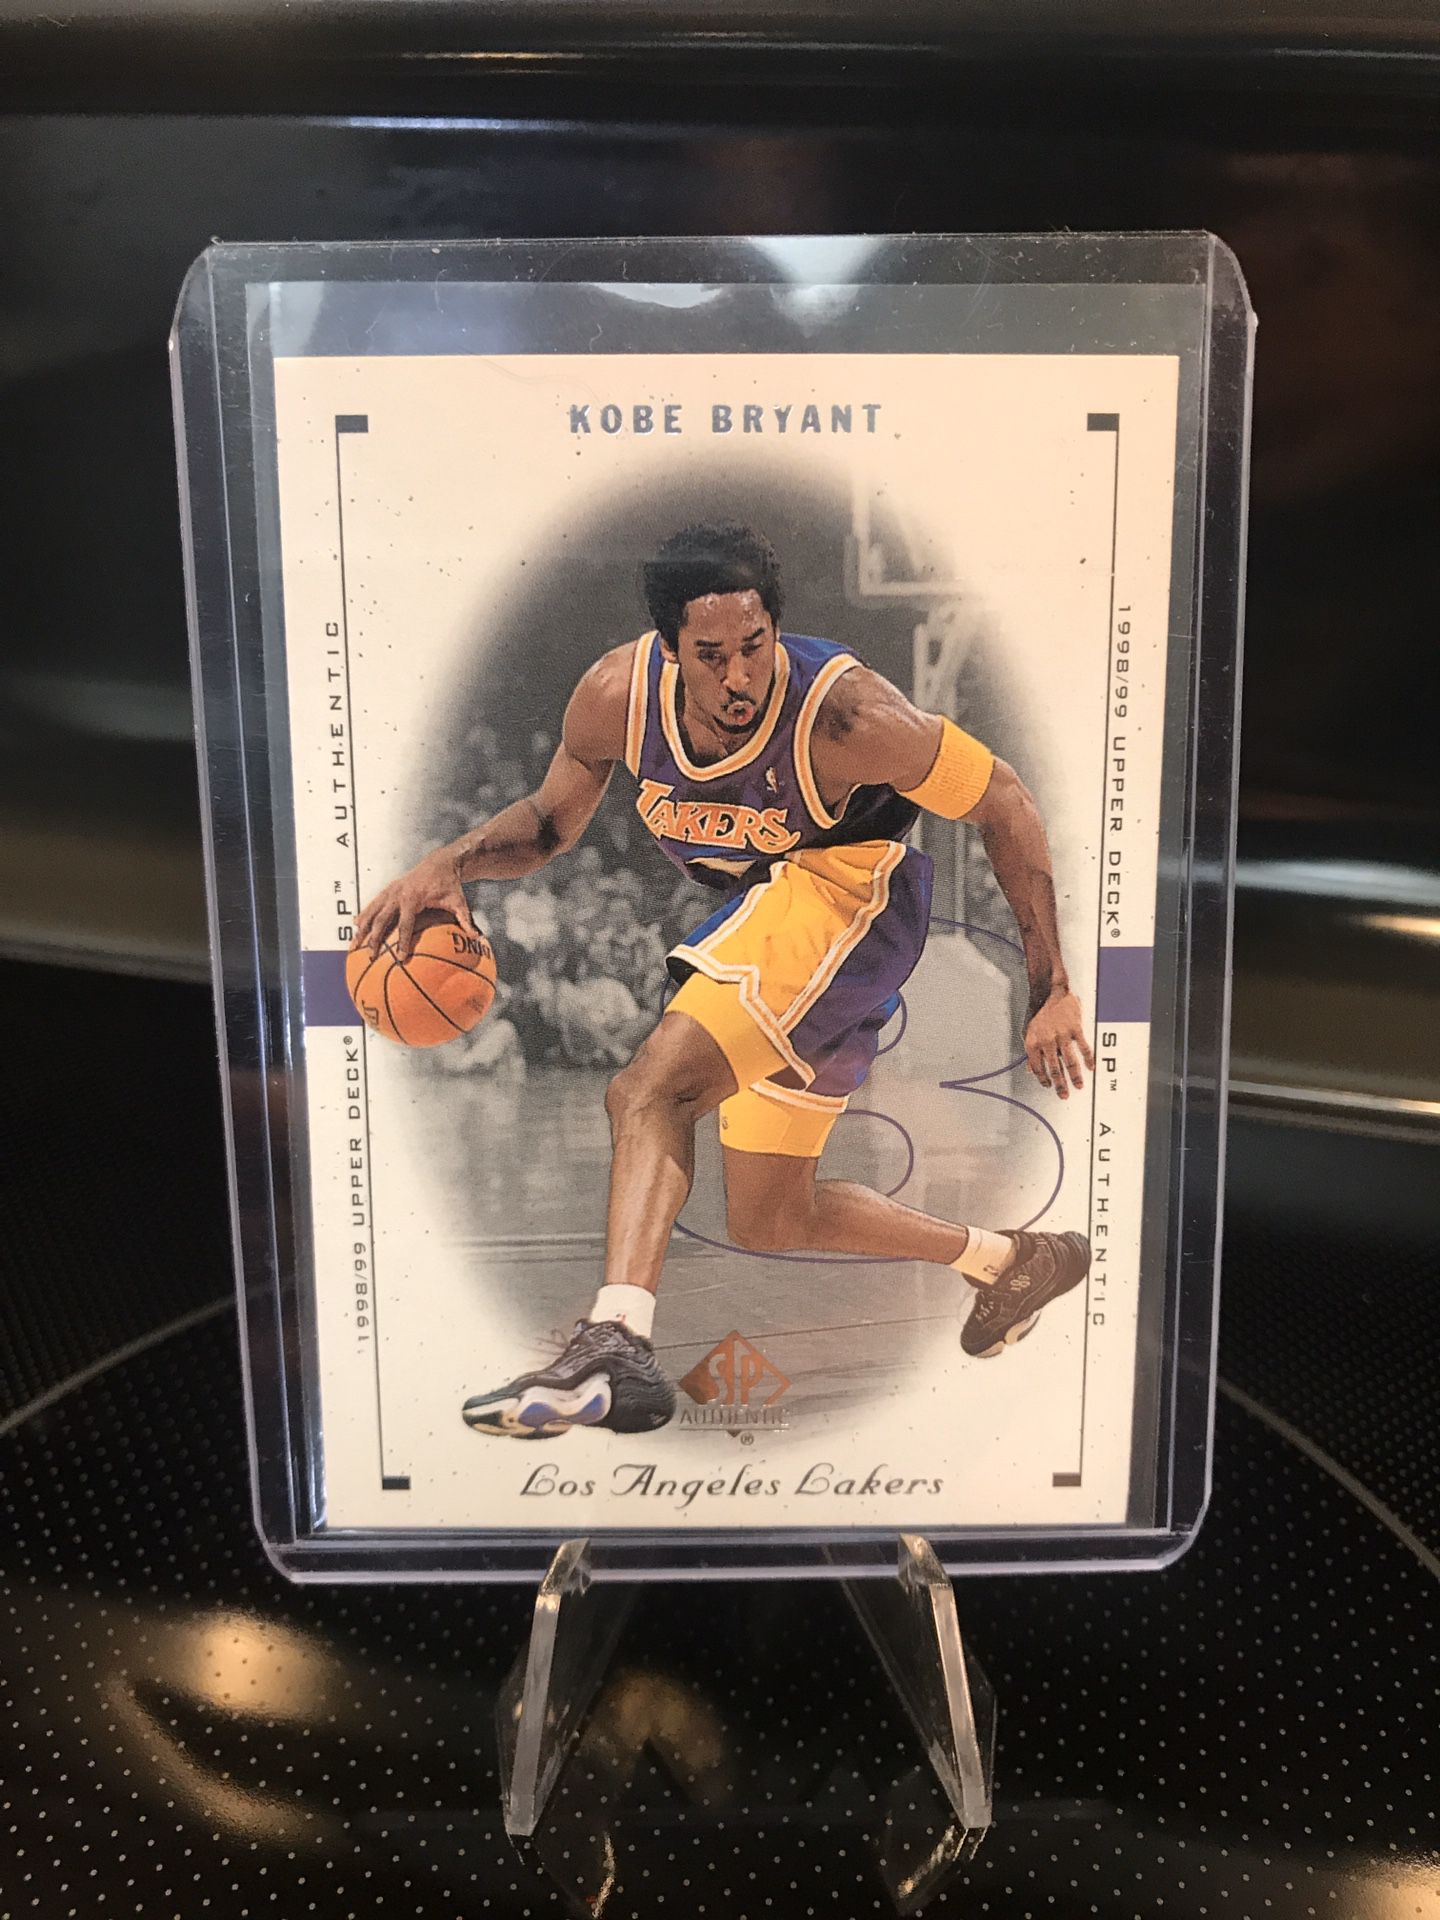 1999 Upper Deck Kobe Bryant Basketball Card - Lakers Jersey 8 Black Mamba Collectible - MINT - PSA Beckett 9 or 10 Possible - $18 OBO